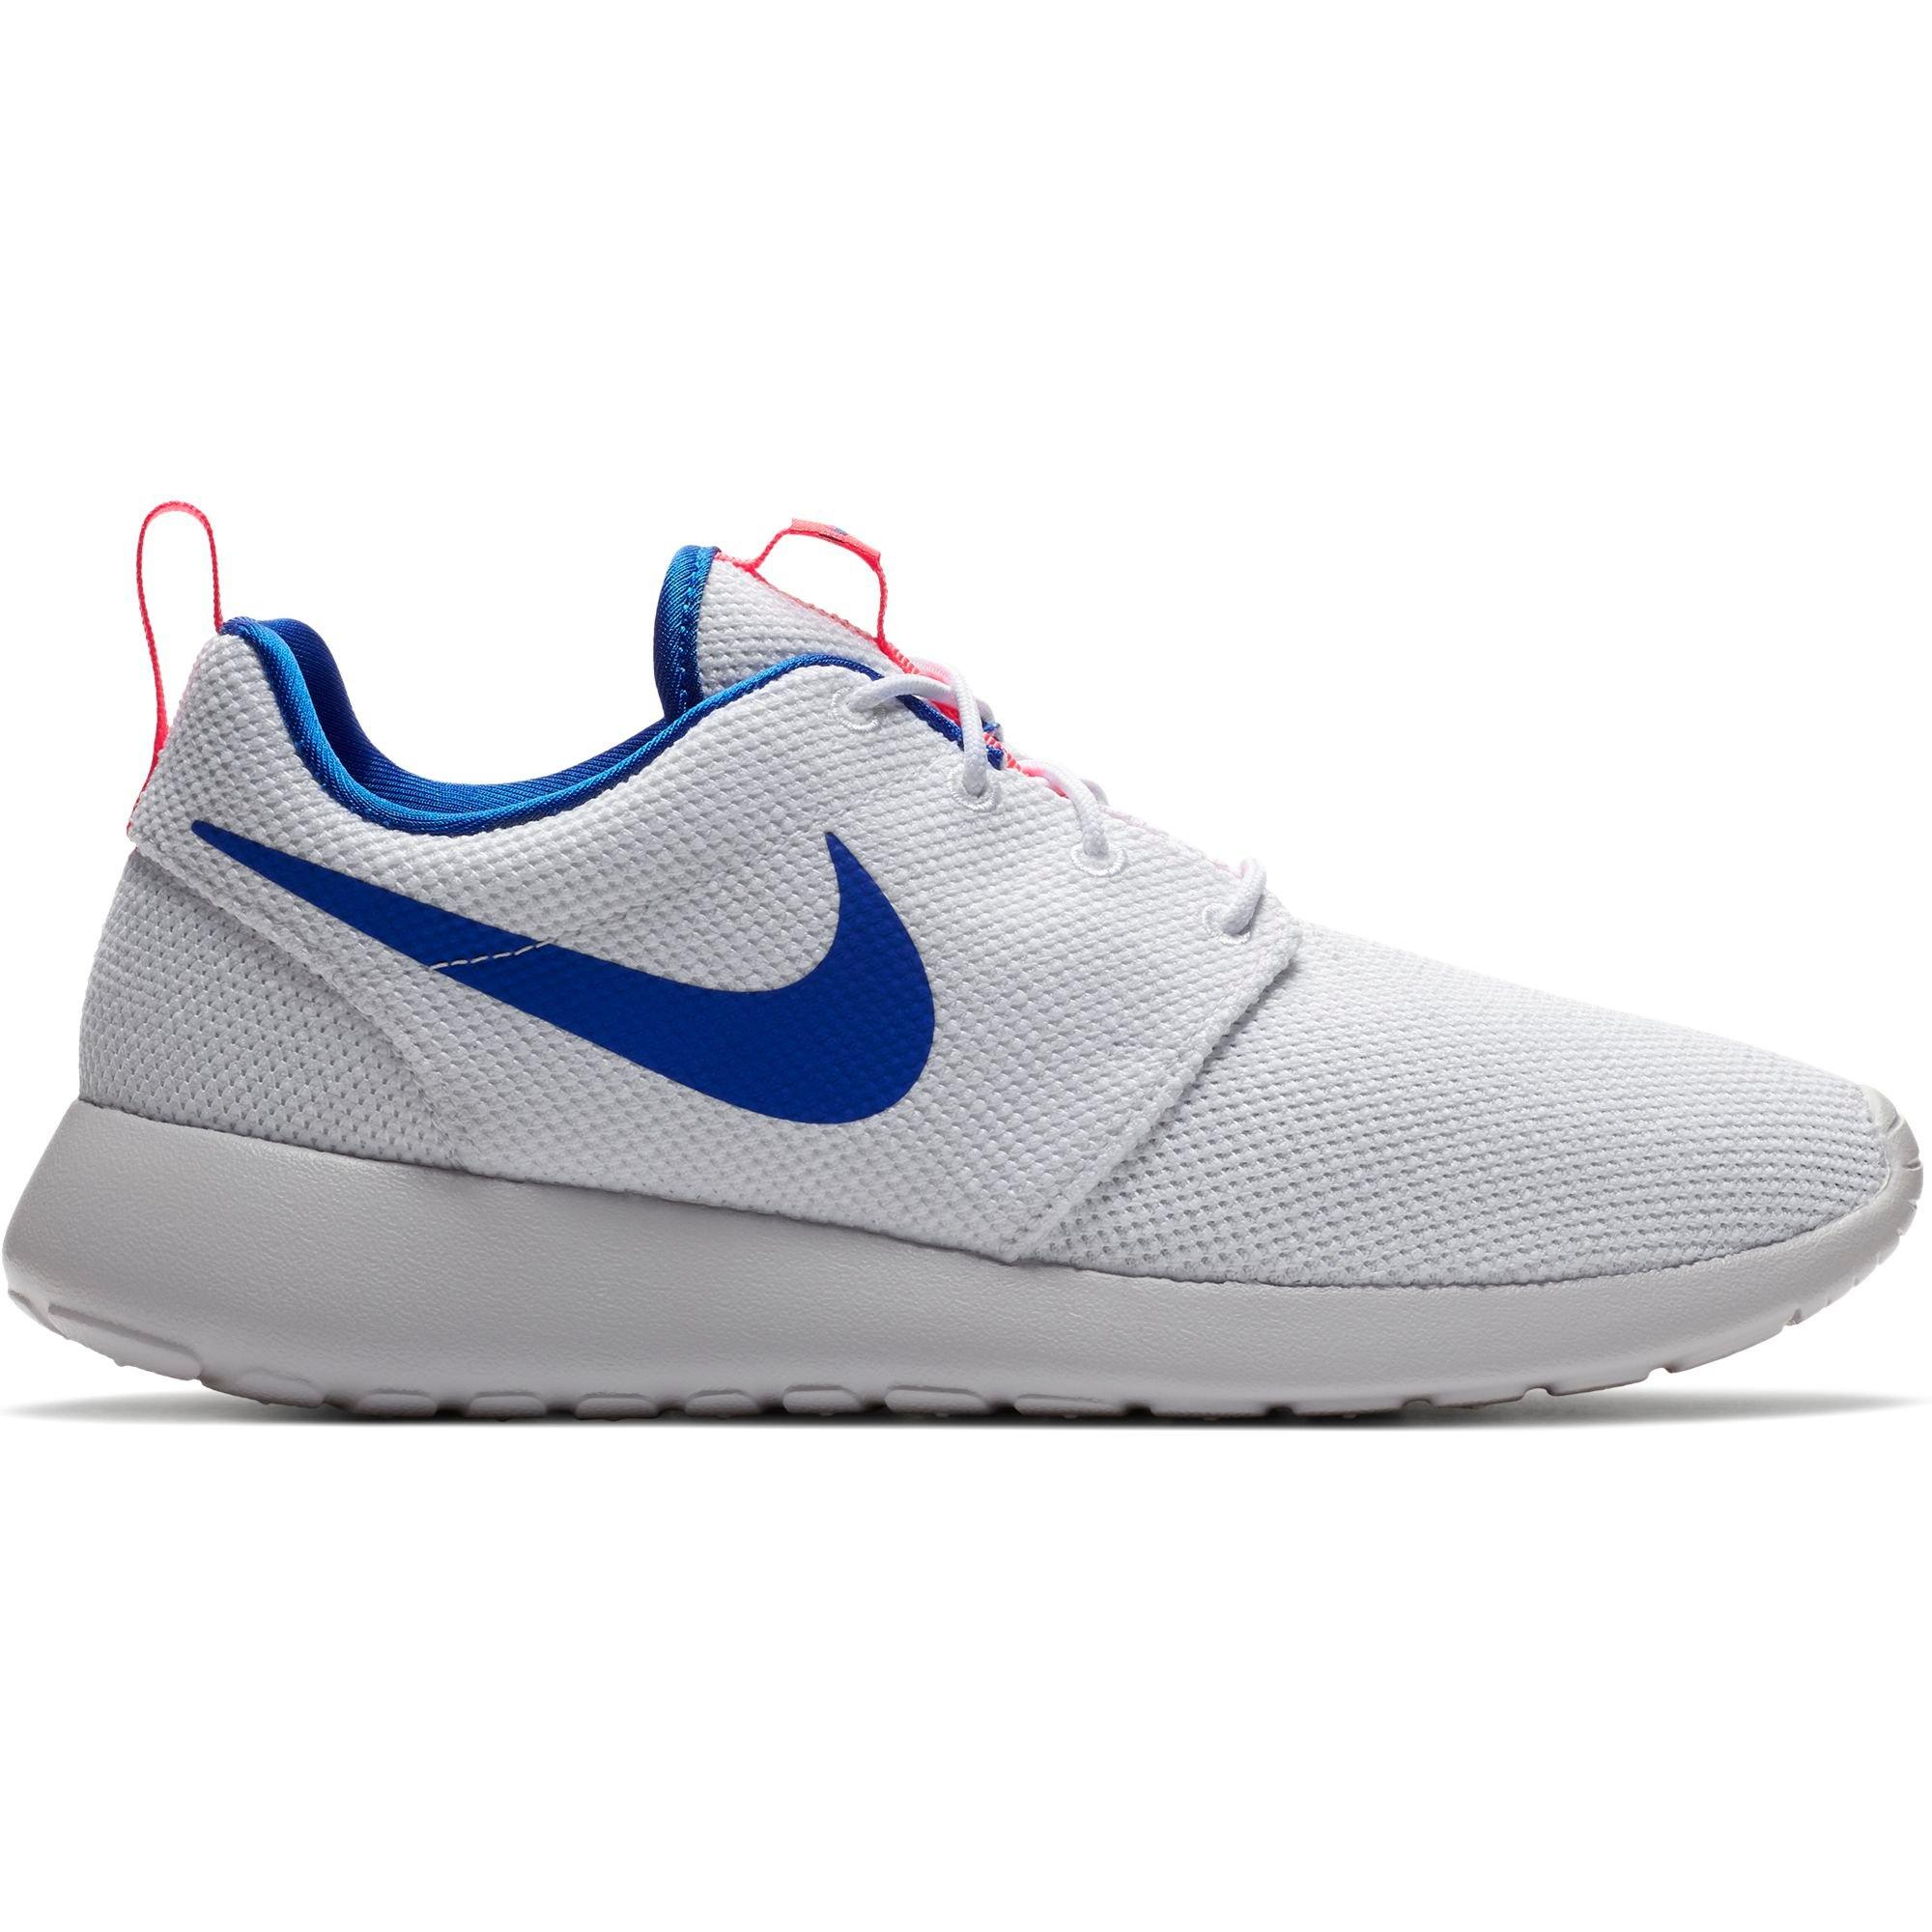 red white and blue roshes